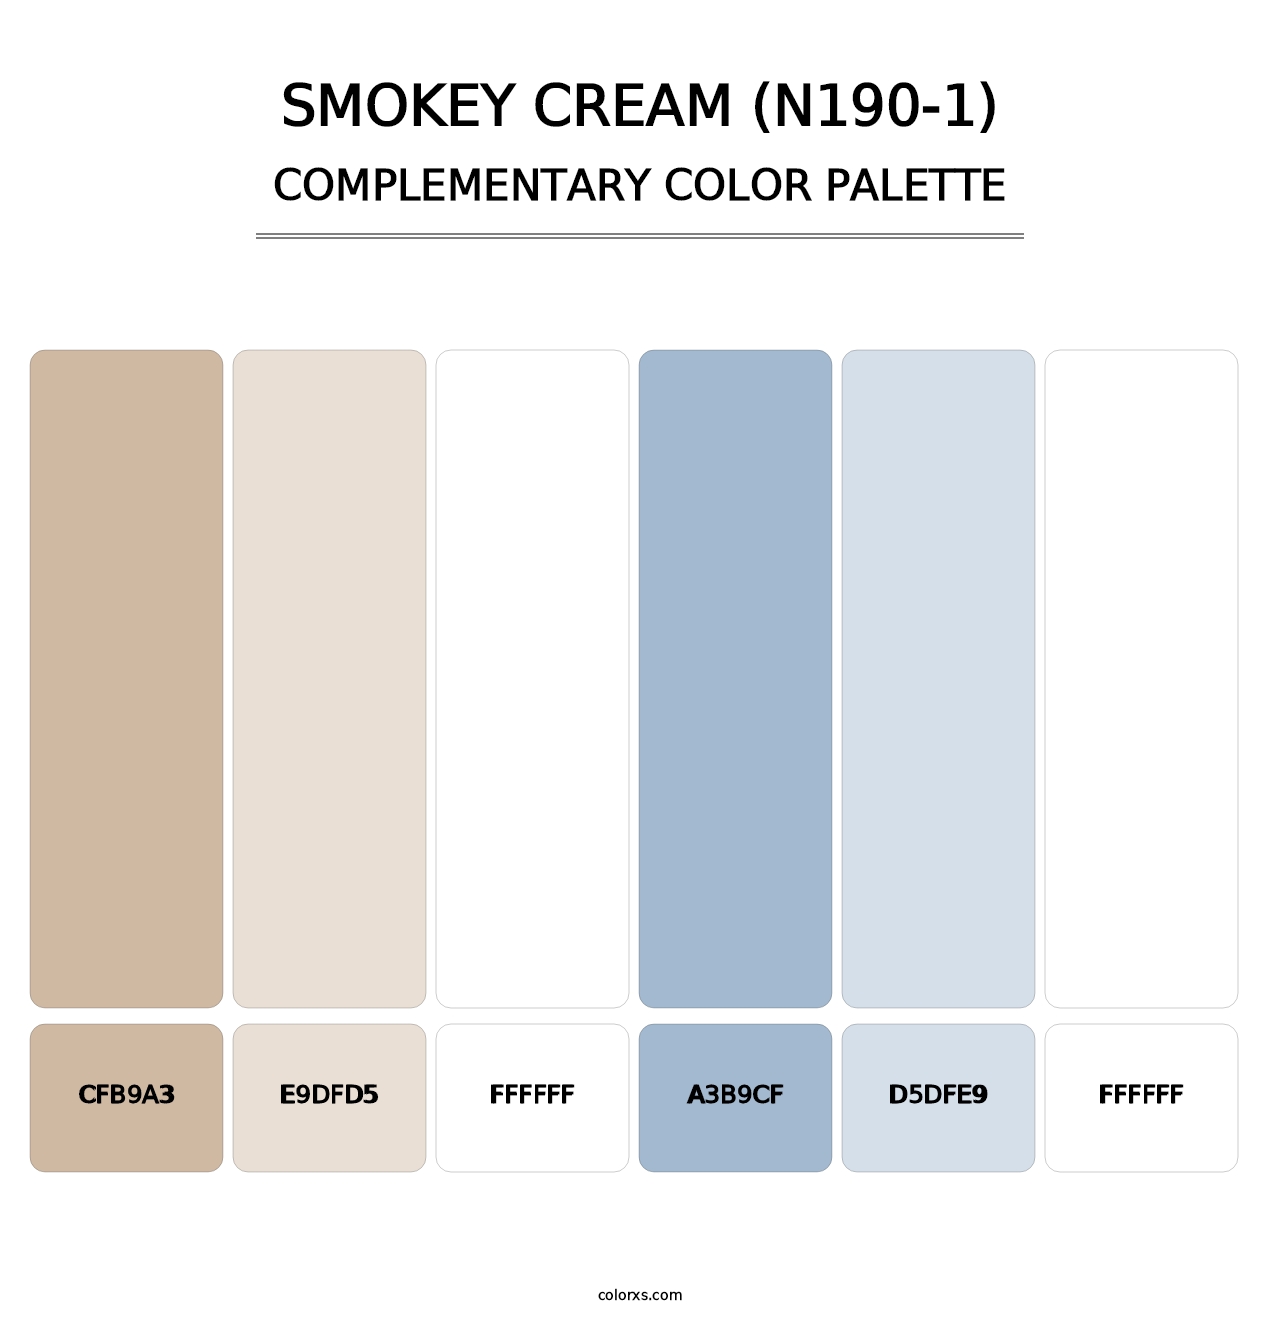 Smokey Cream (N190-1) - Complementary Color Palette